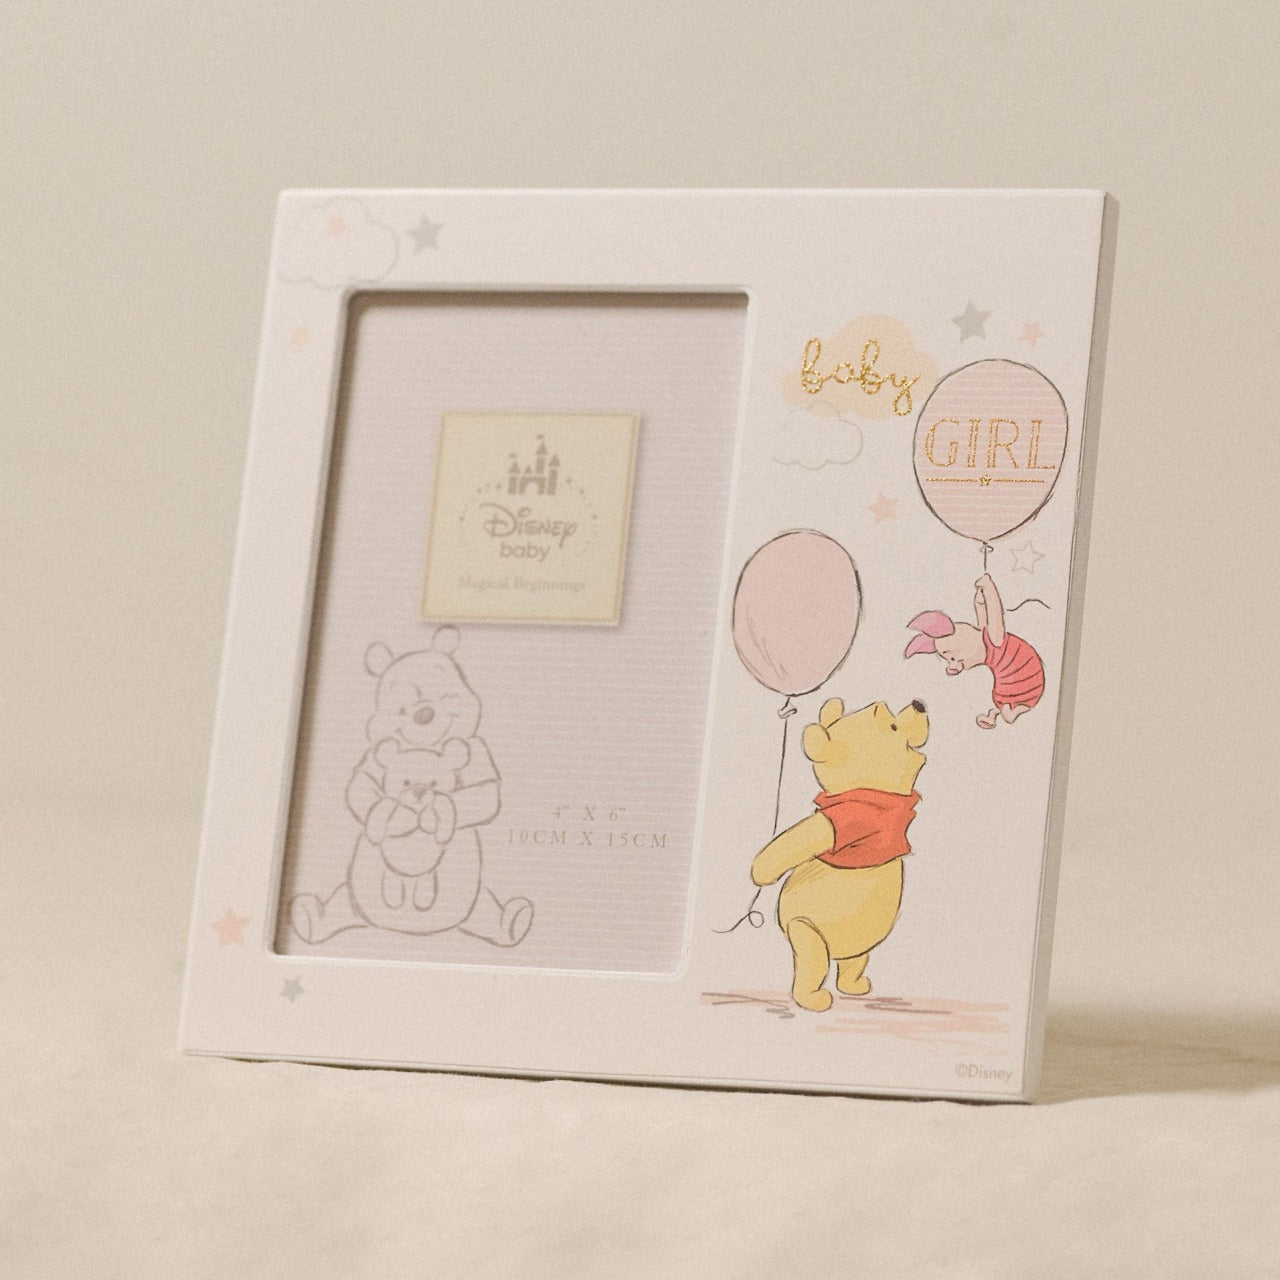 Disney Magical Beginnings Frame Pooh Baby Girl  Add a touch of Disney magic to their everyday with a wonderful Baby Girl frame from the Magical Beginnings Collection from Classic Disney.